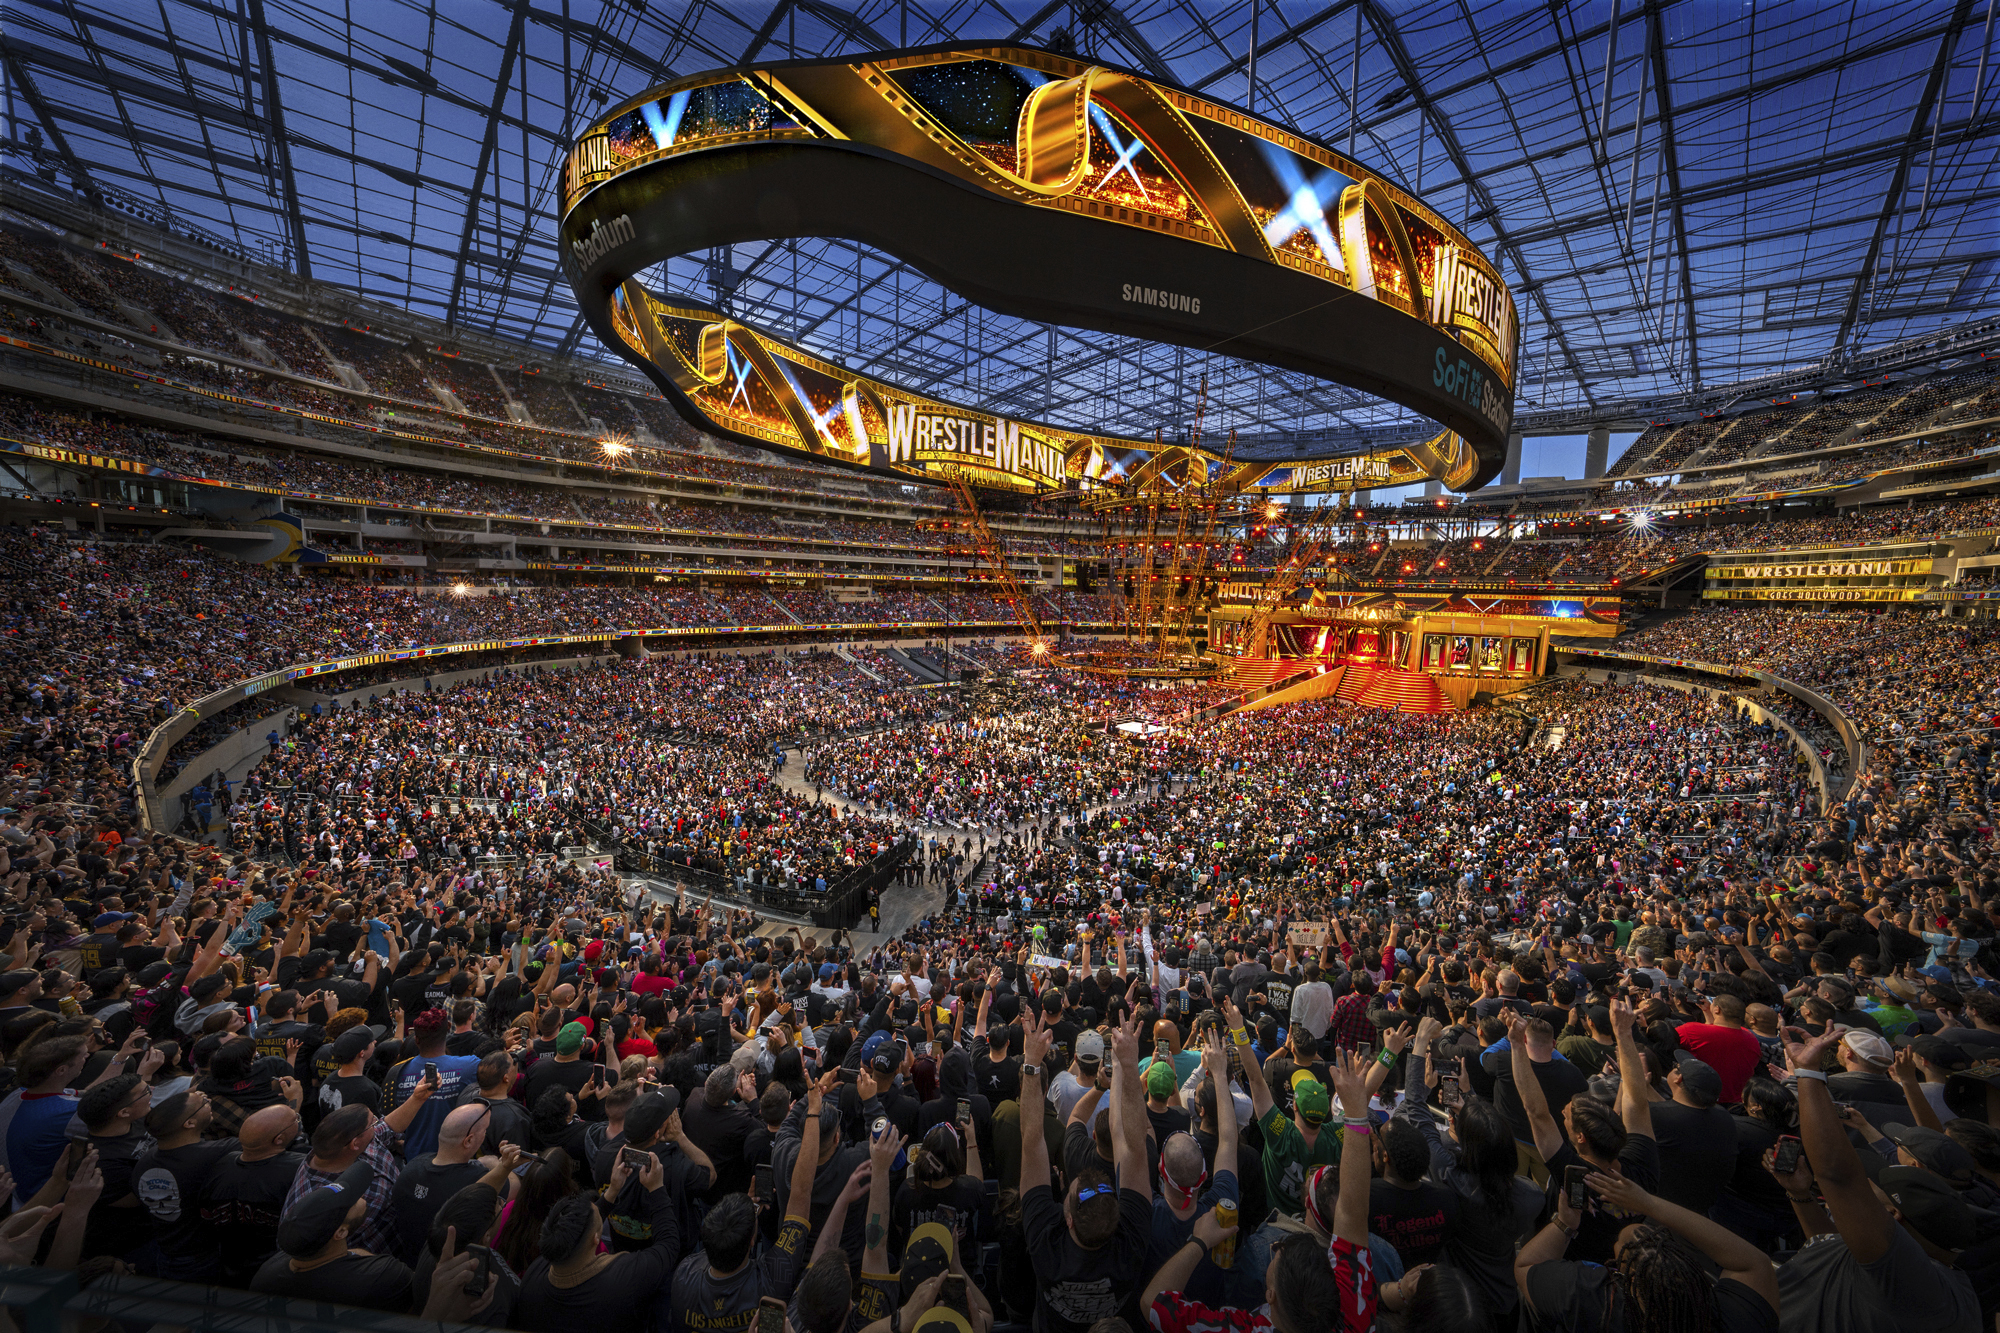 Six Top WWE Superstars Are Being Advertised For WrestleMania 39